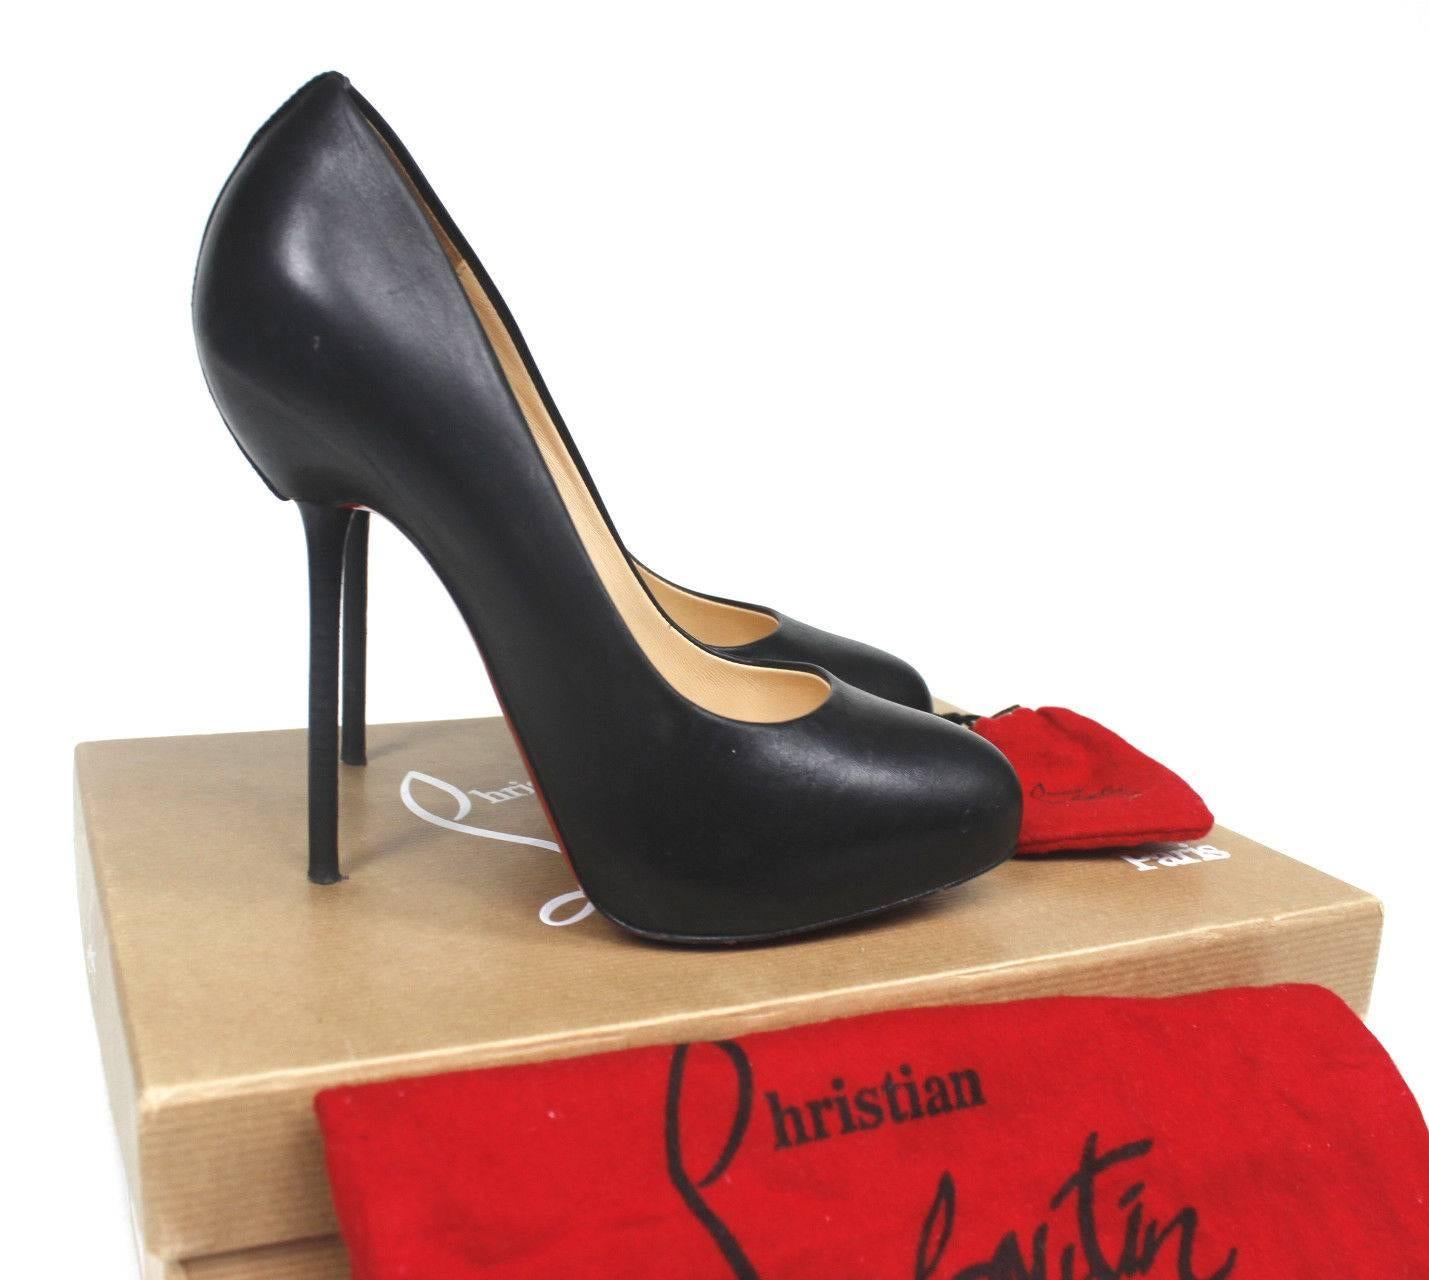 CHRISTIAN LOUBOUTIN Big Stack 120 leather pumps 36.5 UK 3.5

Christian Louboutin's pin-heeled leather pumps will bring instant sophistication to every look. 

Wear them to dress up a sweater and skinny jeans, flashing that signature red sole for a